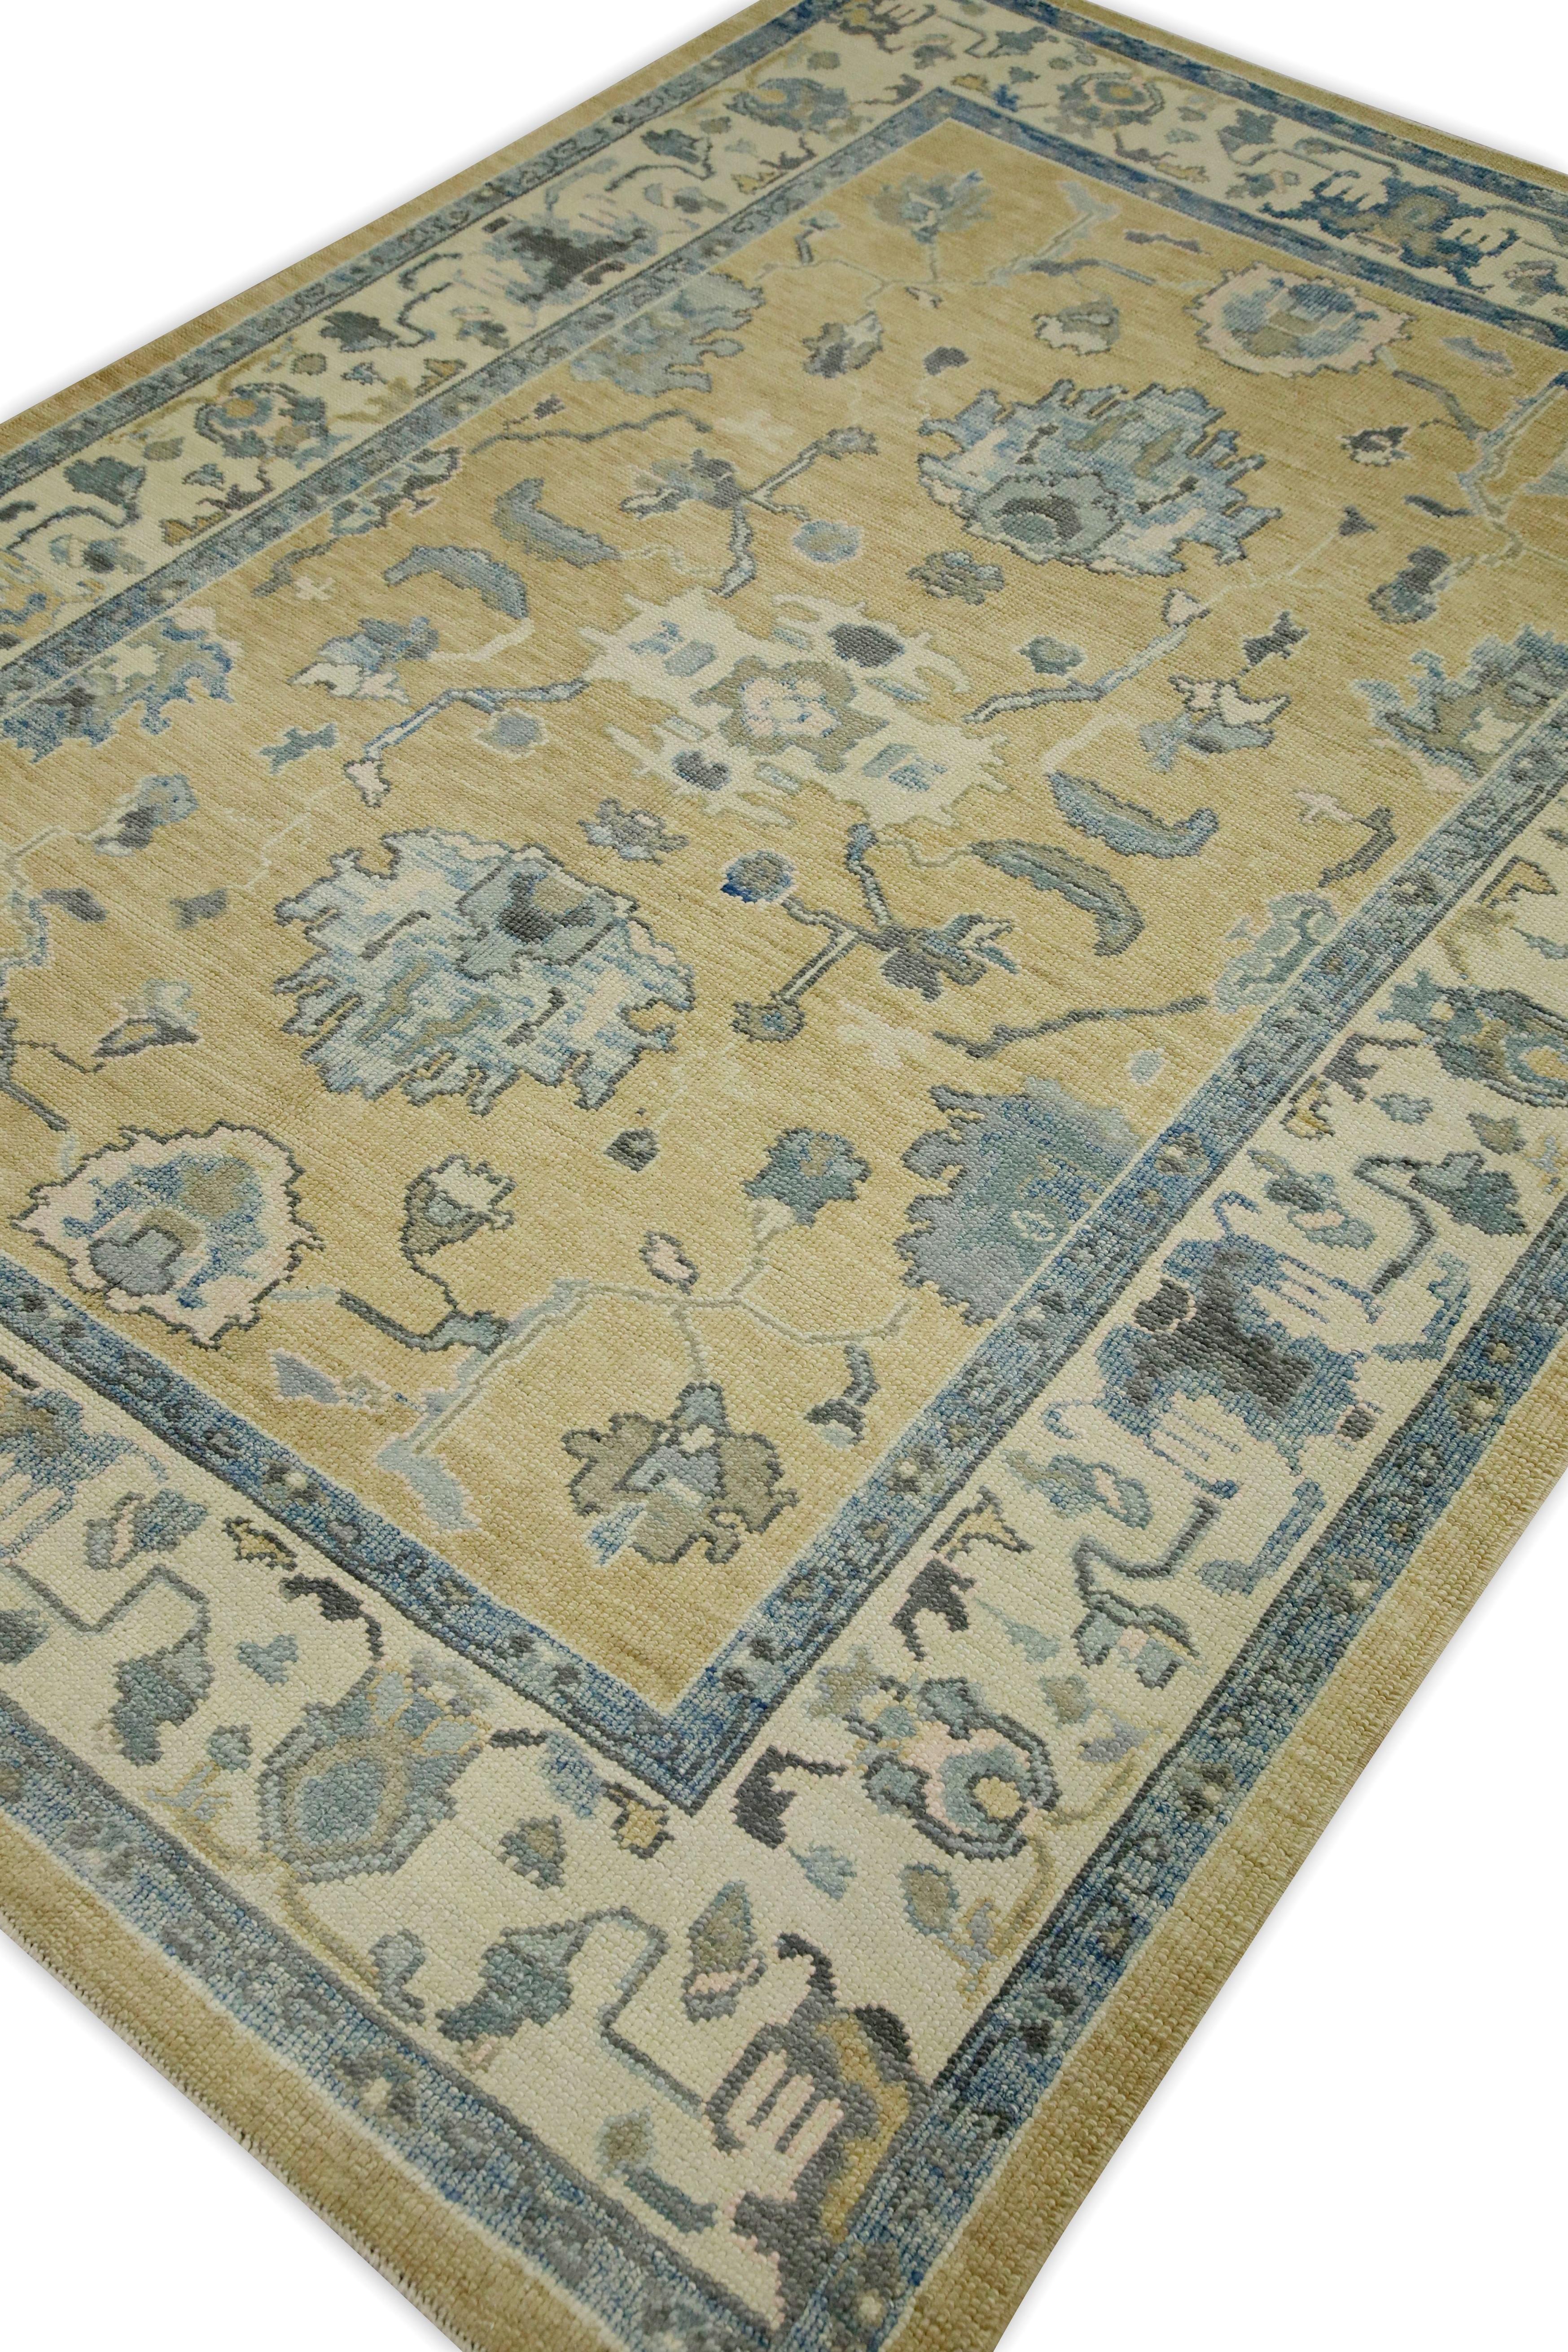 Contemporary Yellow & Blue Floral Design Handwoven Wool Turkish Oushak Rug 6'1